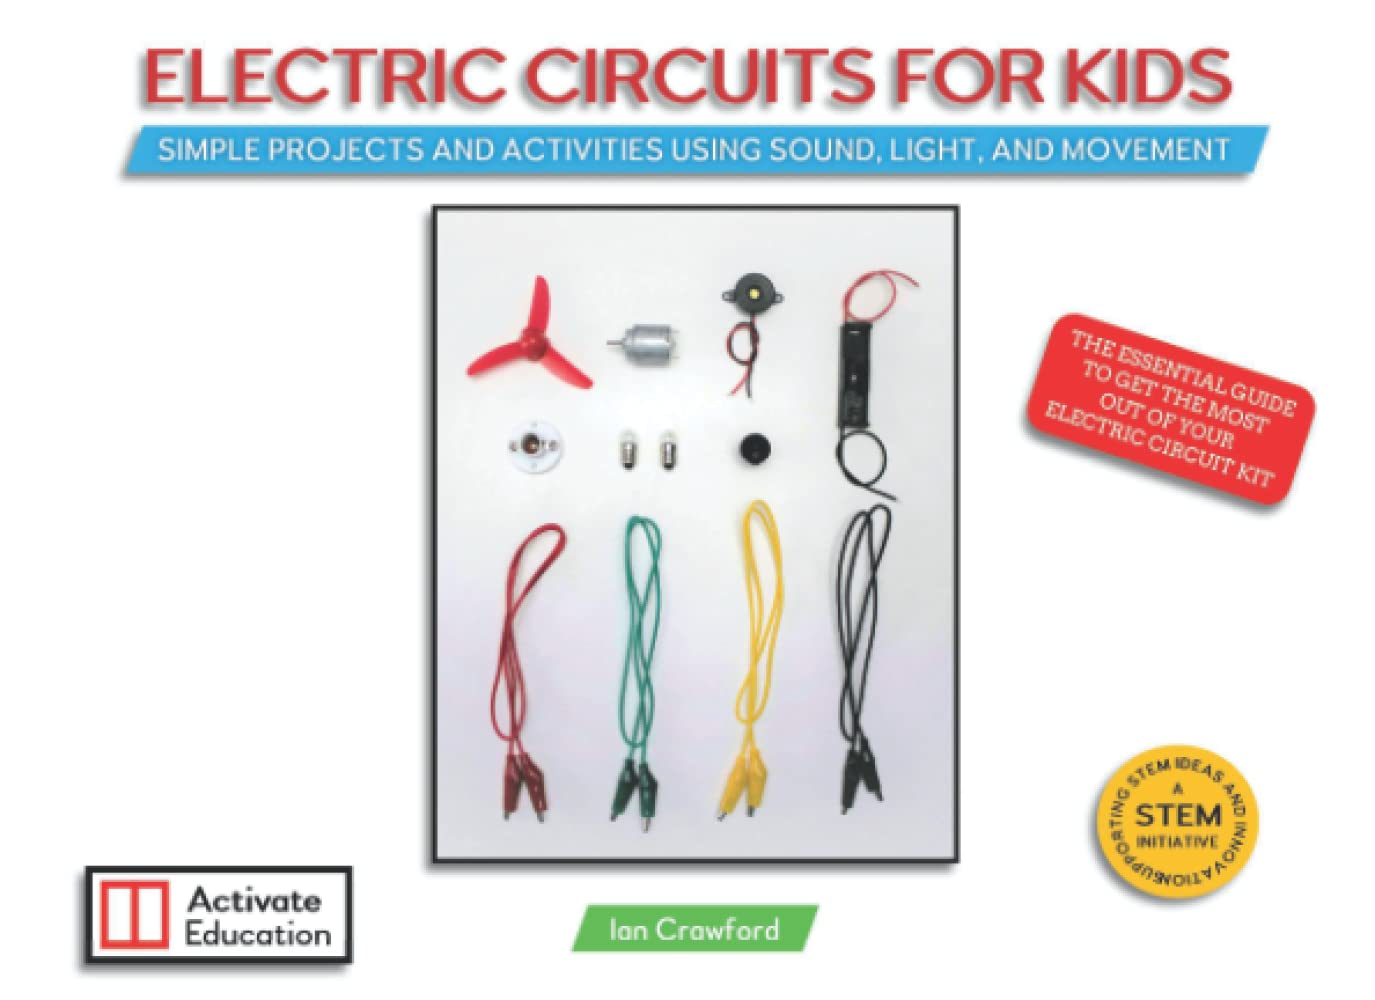 Electric Car Kit using a simple electric circuit by Activate Education